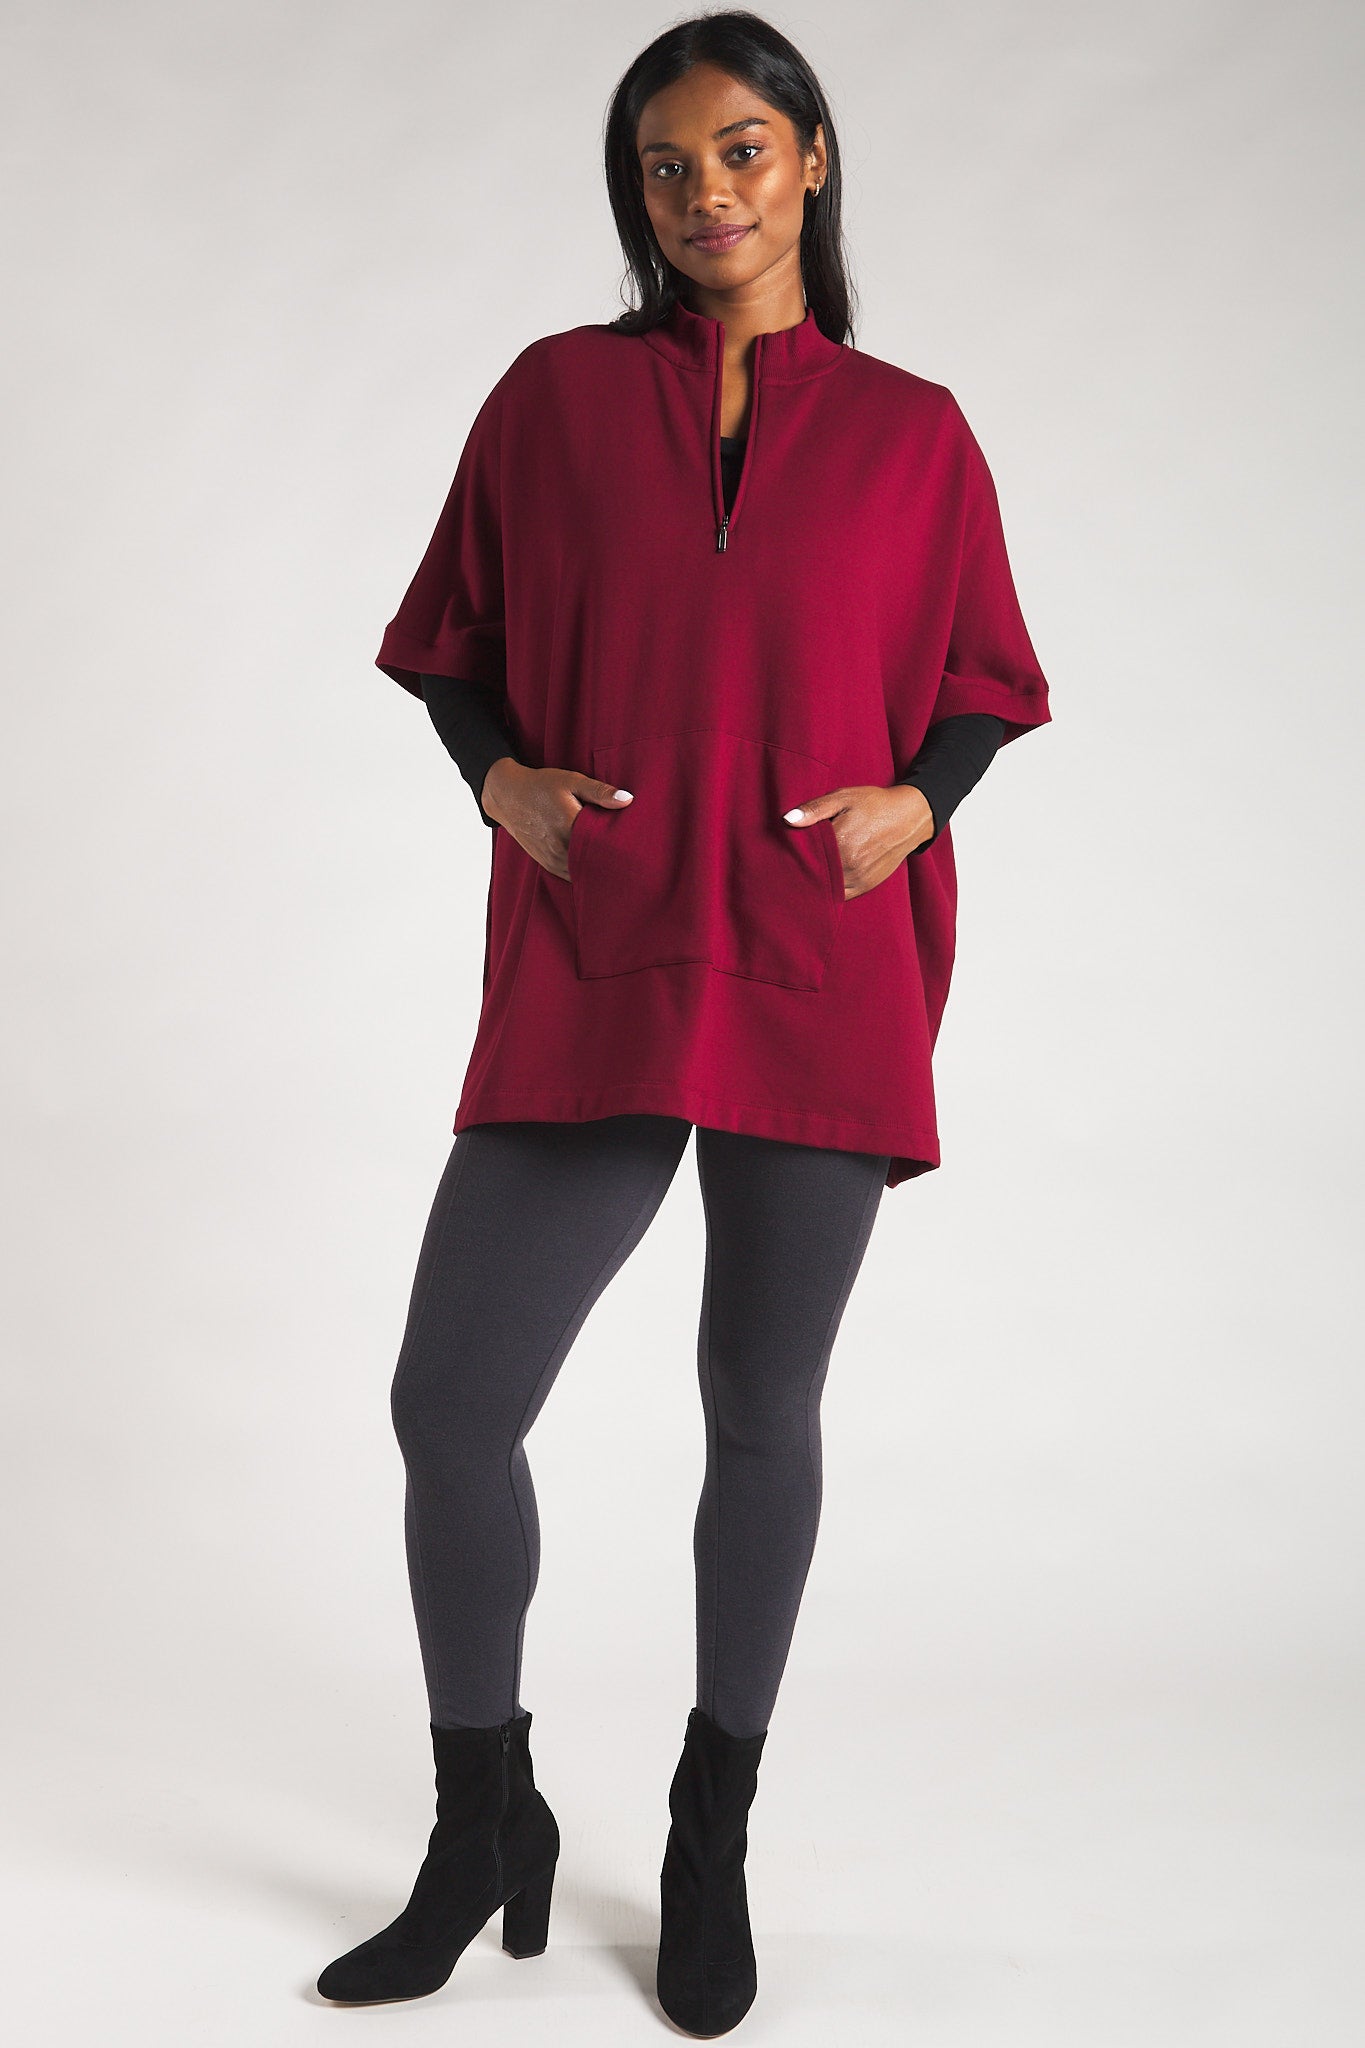 Women’s poncho sweater paired with sustainable bamboo leggings. 